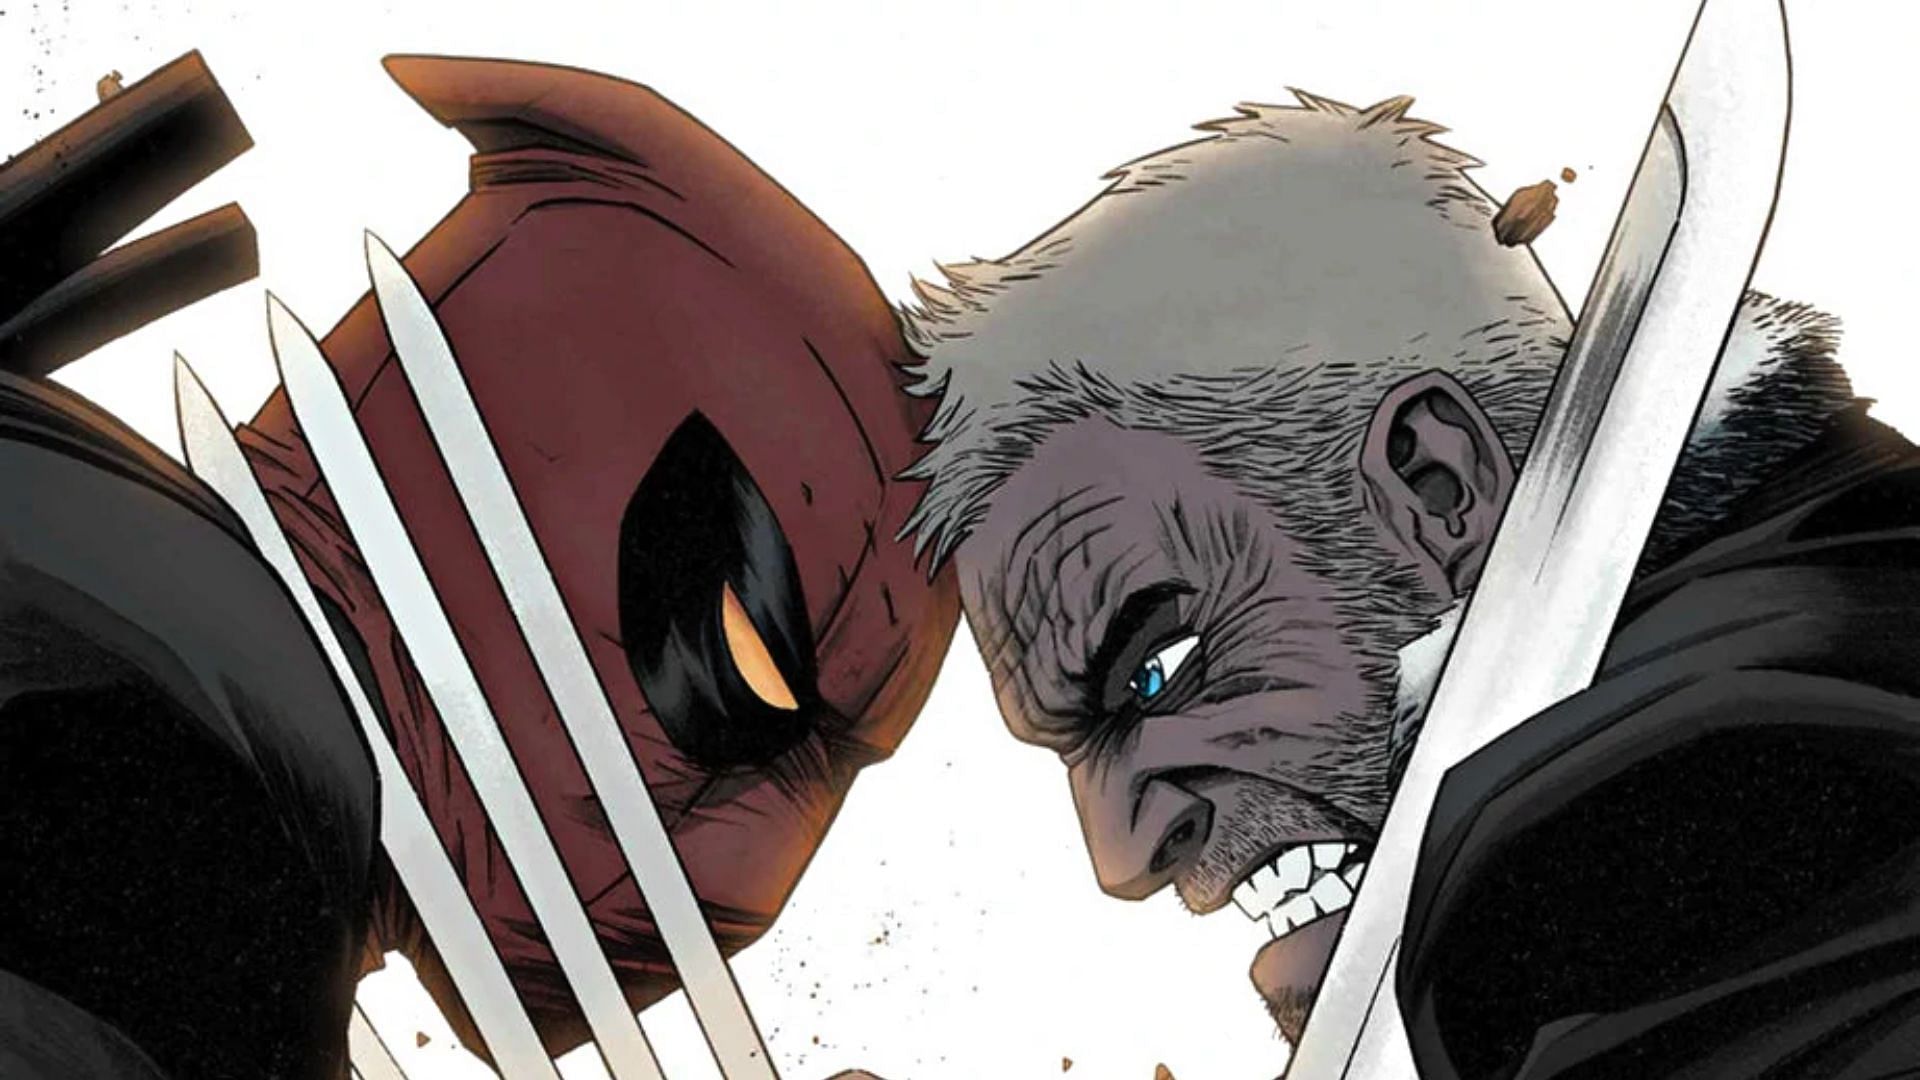 marvel characters who can beat deadpool: 10 Marvel heroes who can beat  Deadpool, ranked